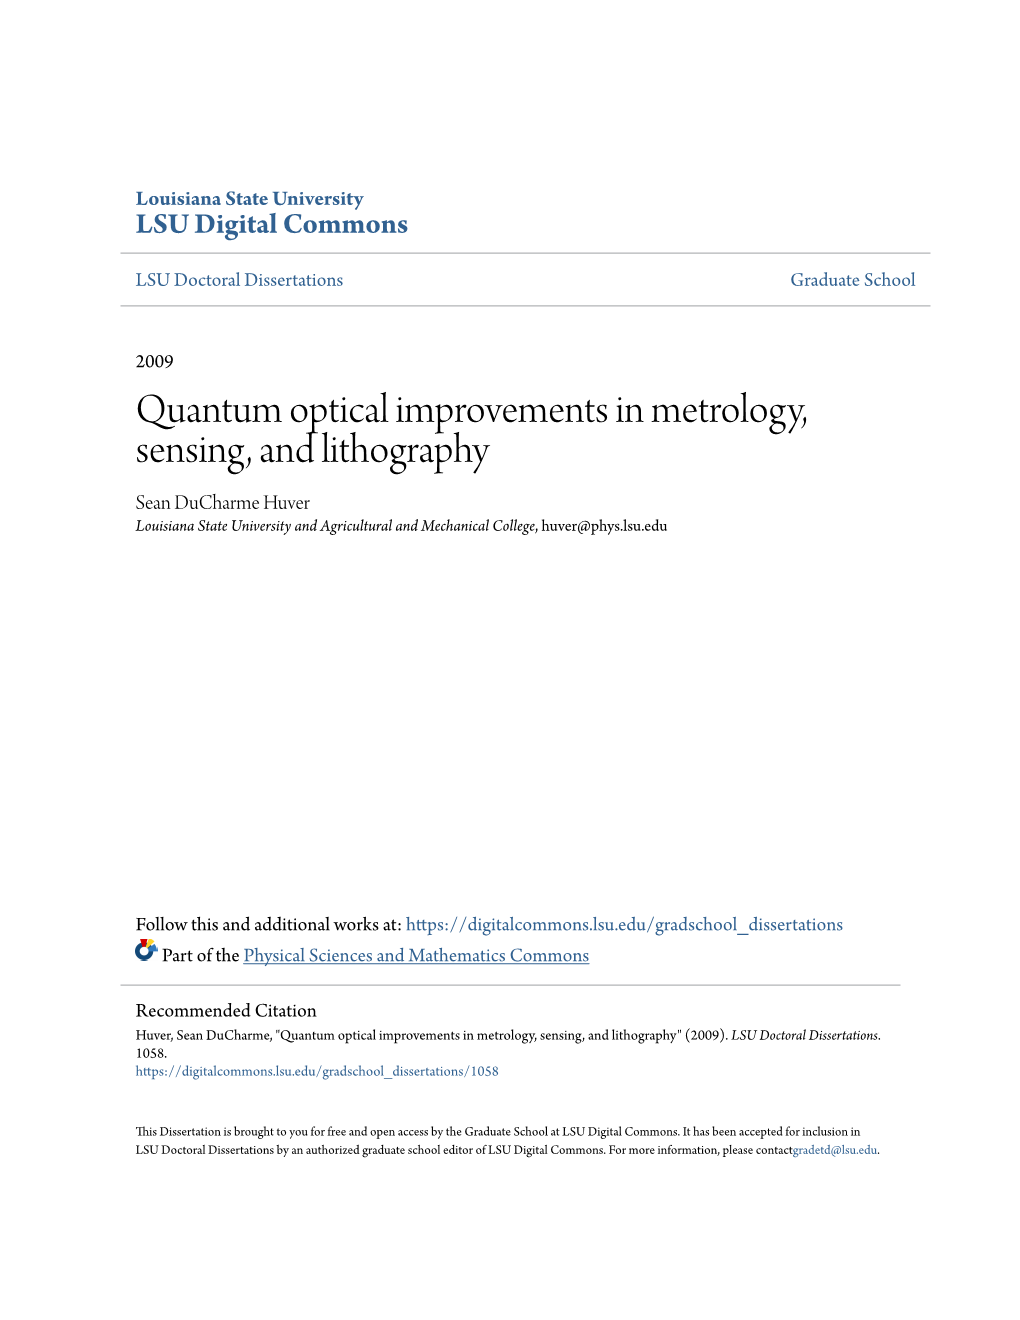 Quantum Optical Improvements in Metrology, Sensing, and Lithography